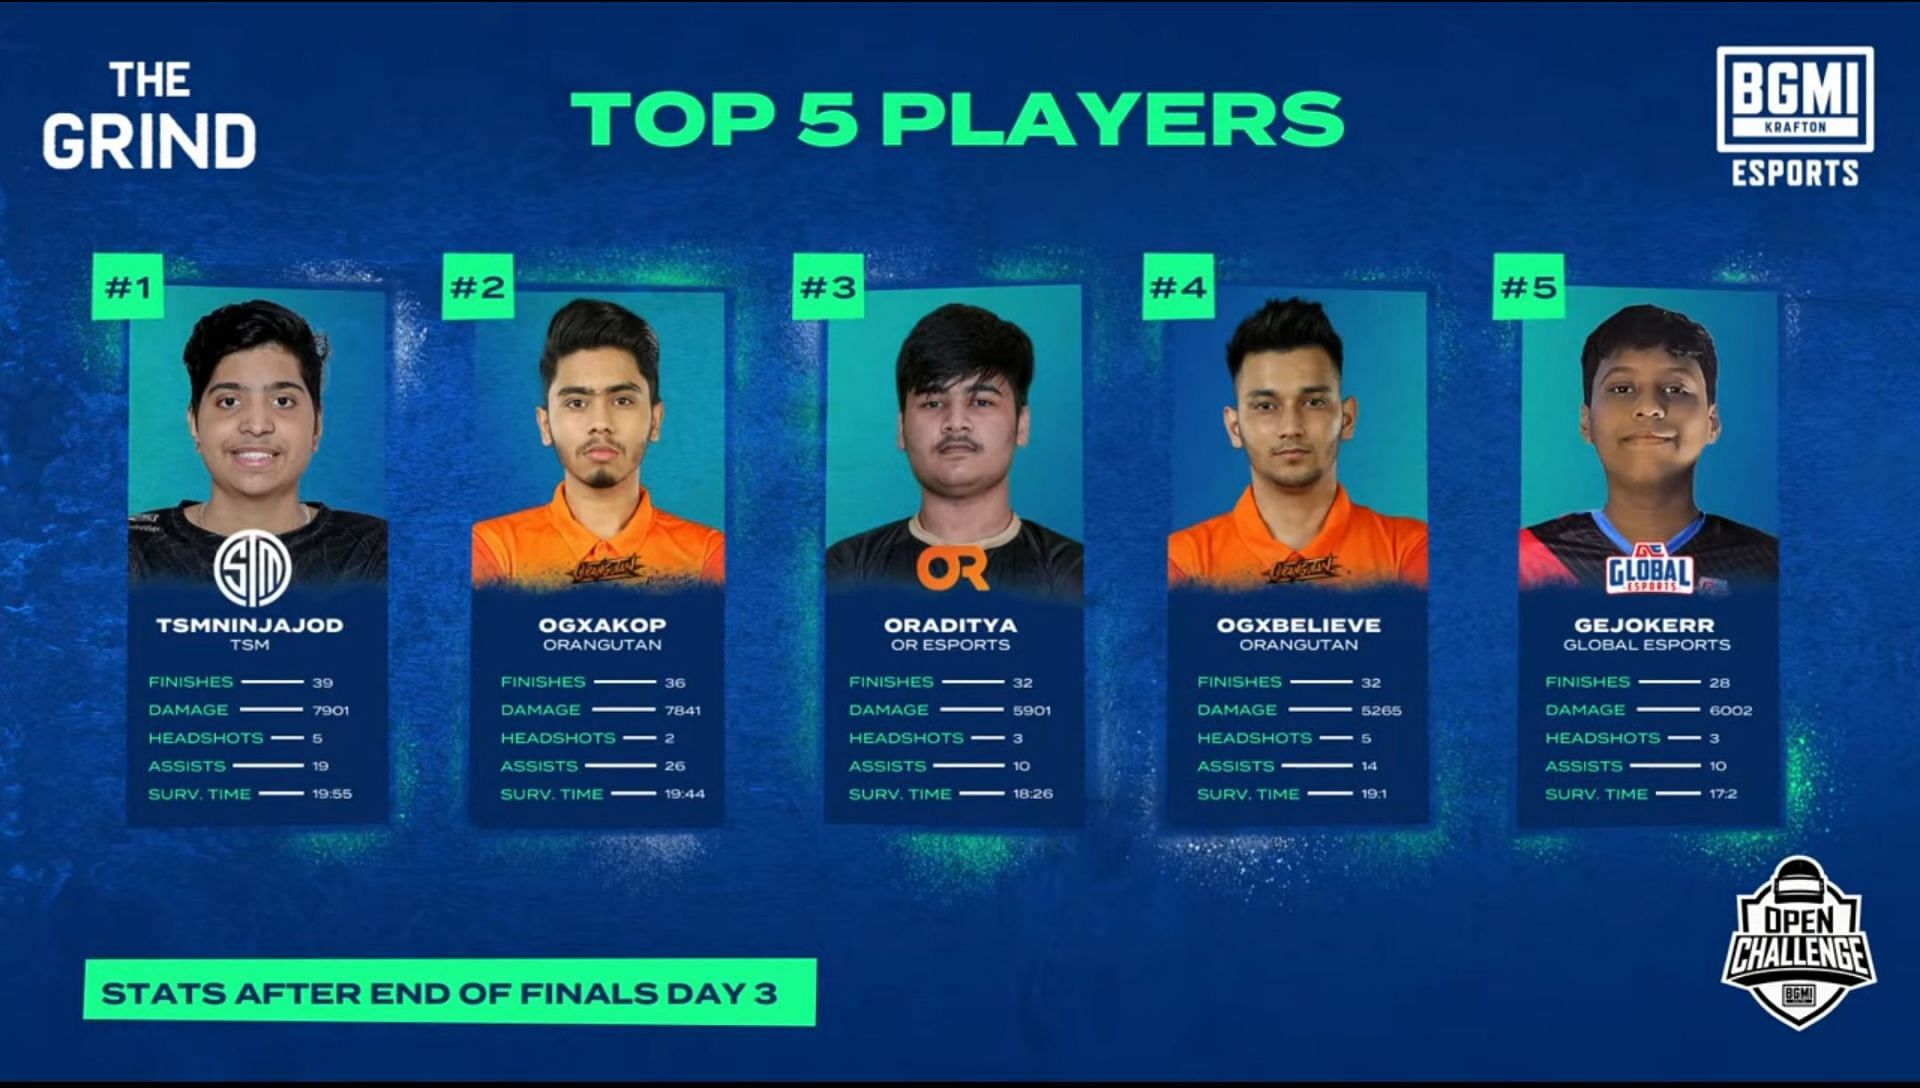 Top 5 players after BMOC The Grind finals day 3 (Image via BGMI)